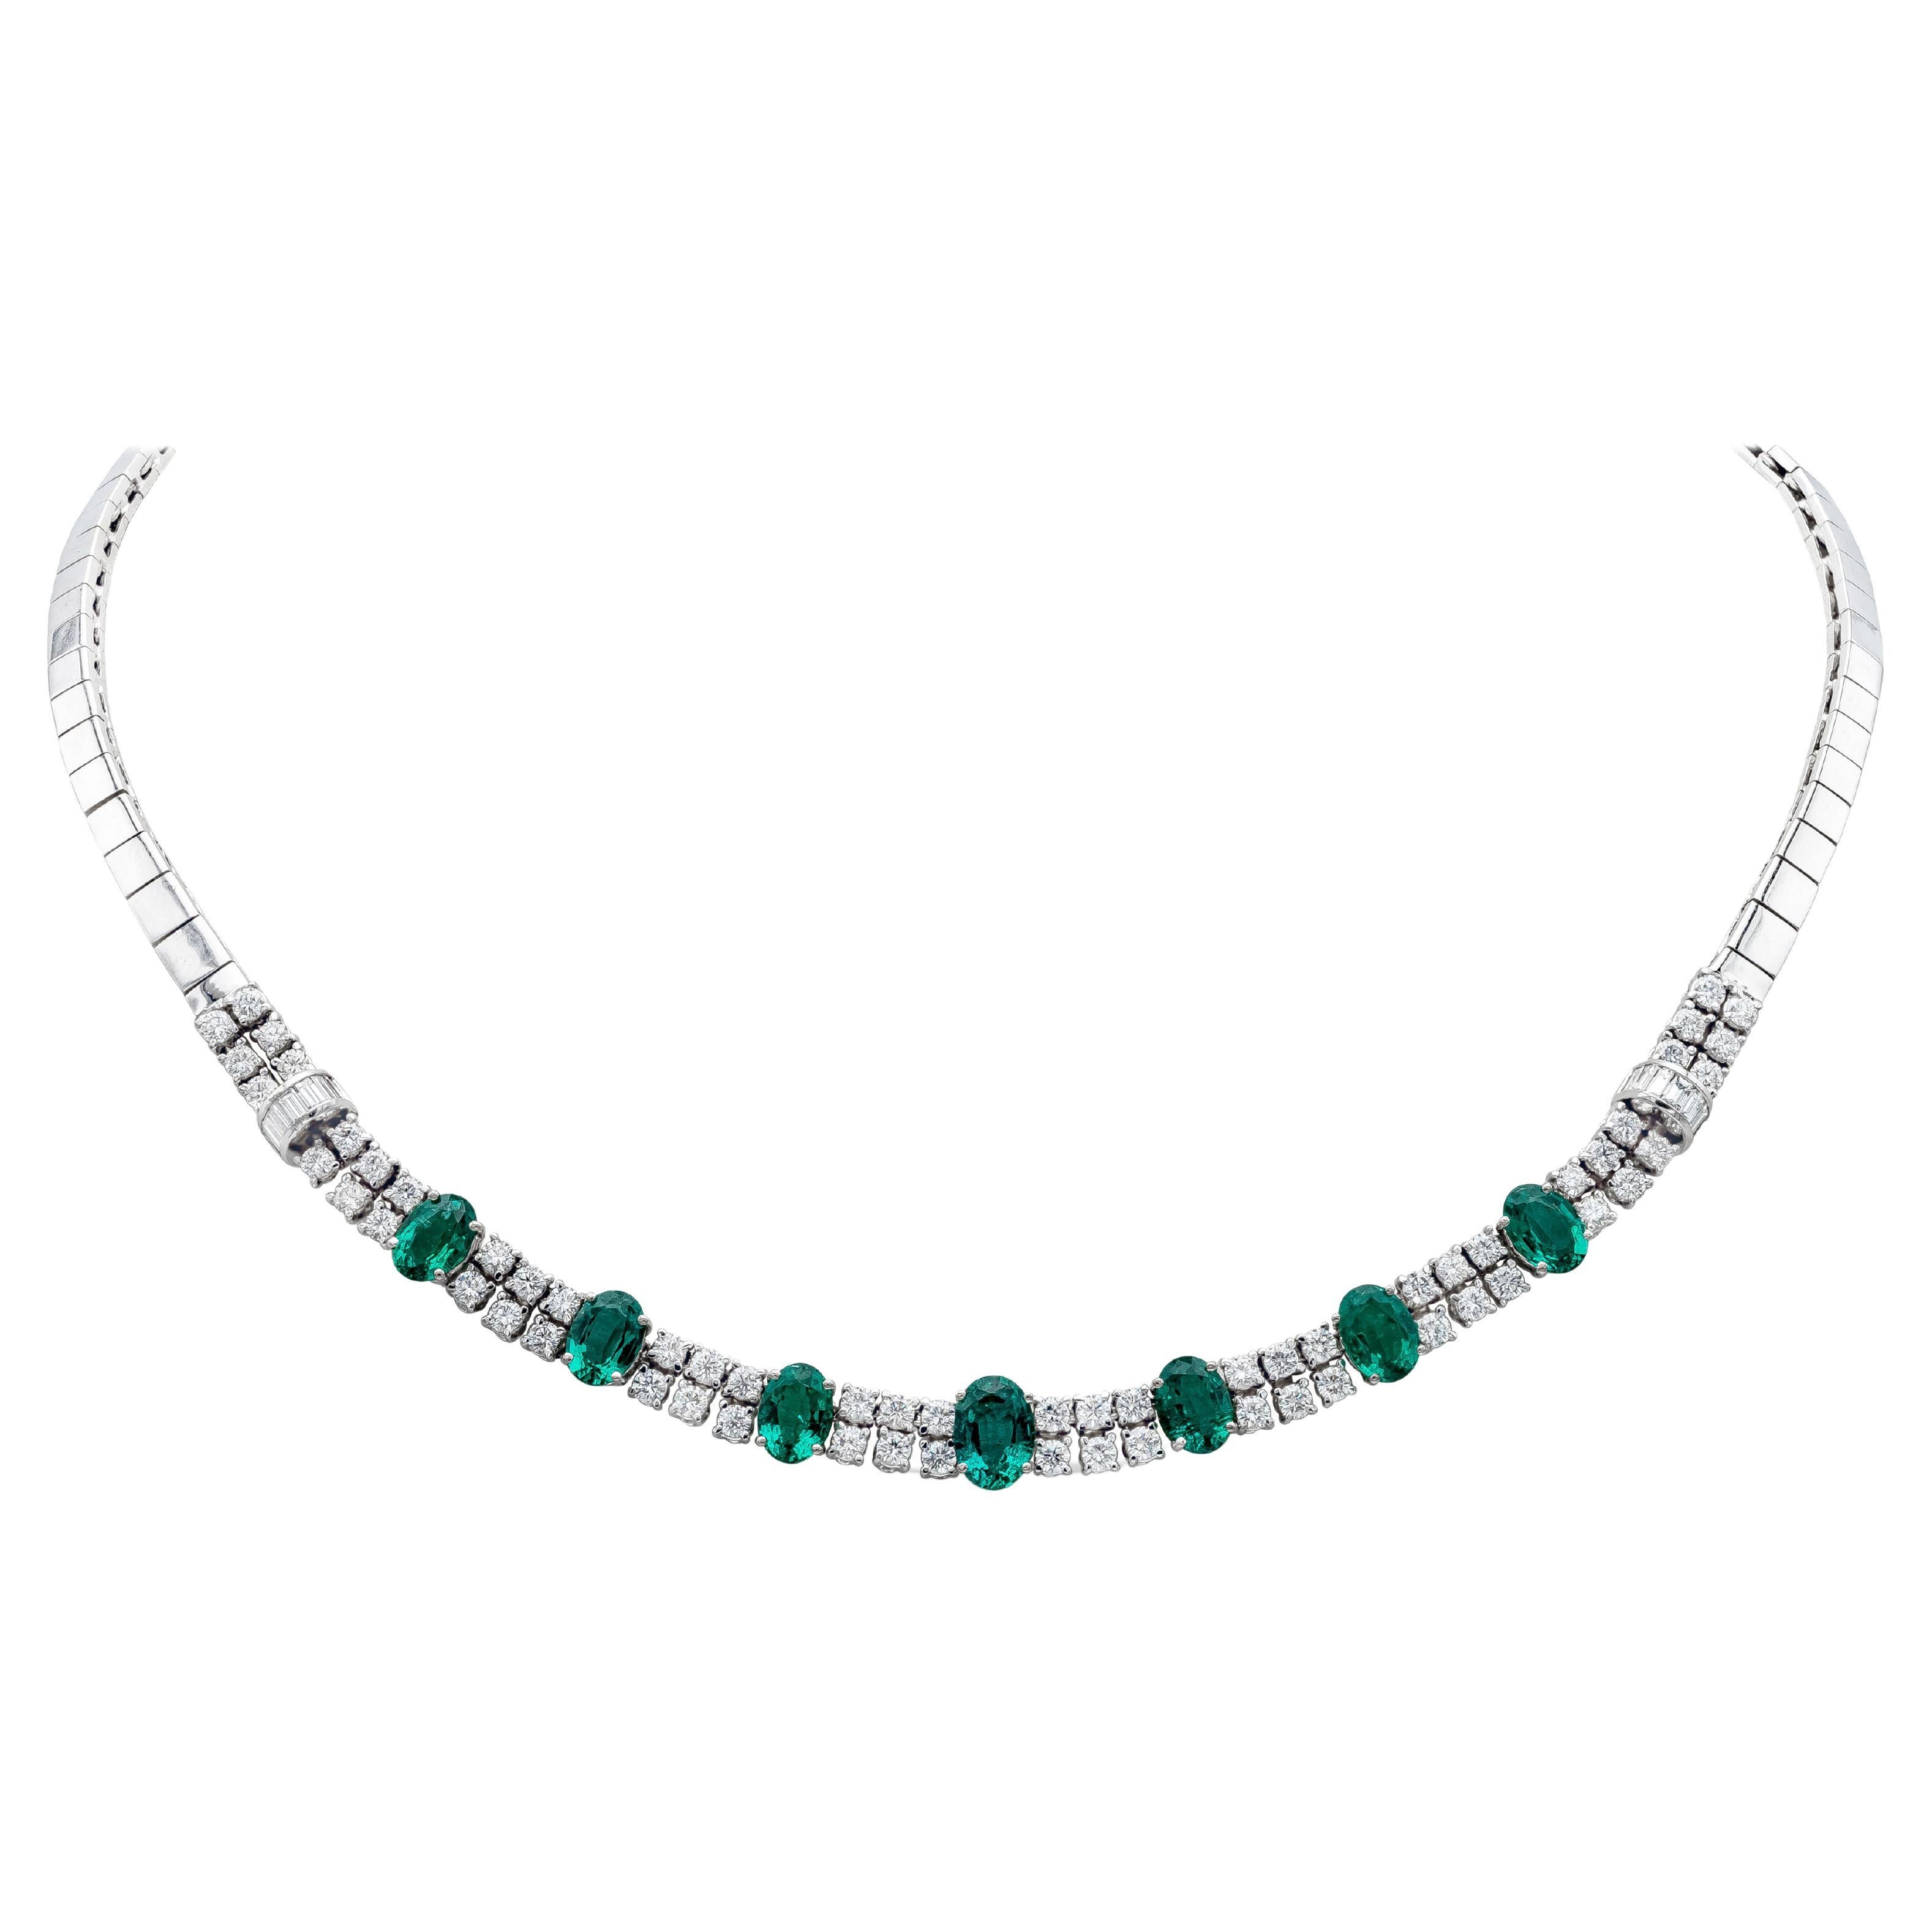 Roman Malakov 9.70 Carat Total, Oval Cut Green Emerald and Diamond Necklace For Sale